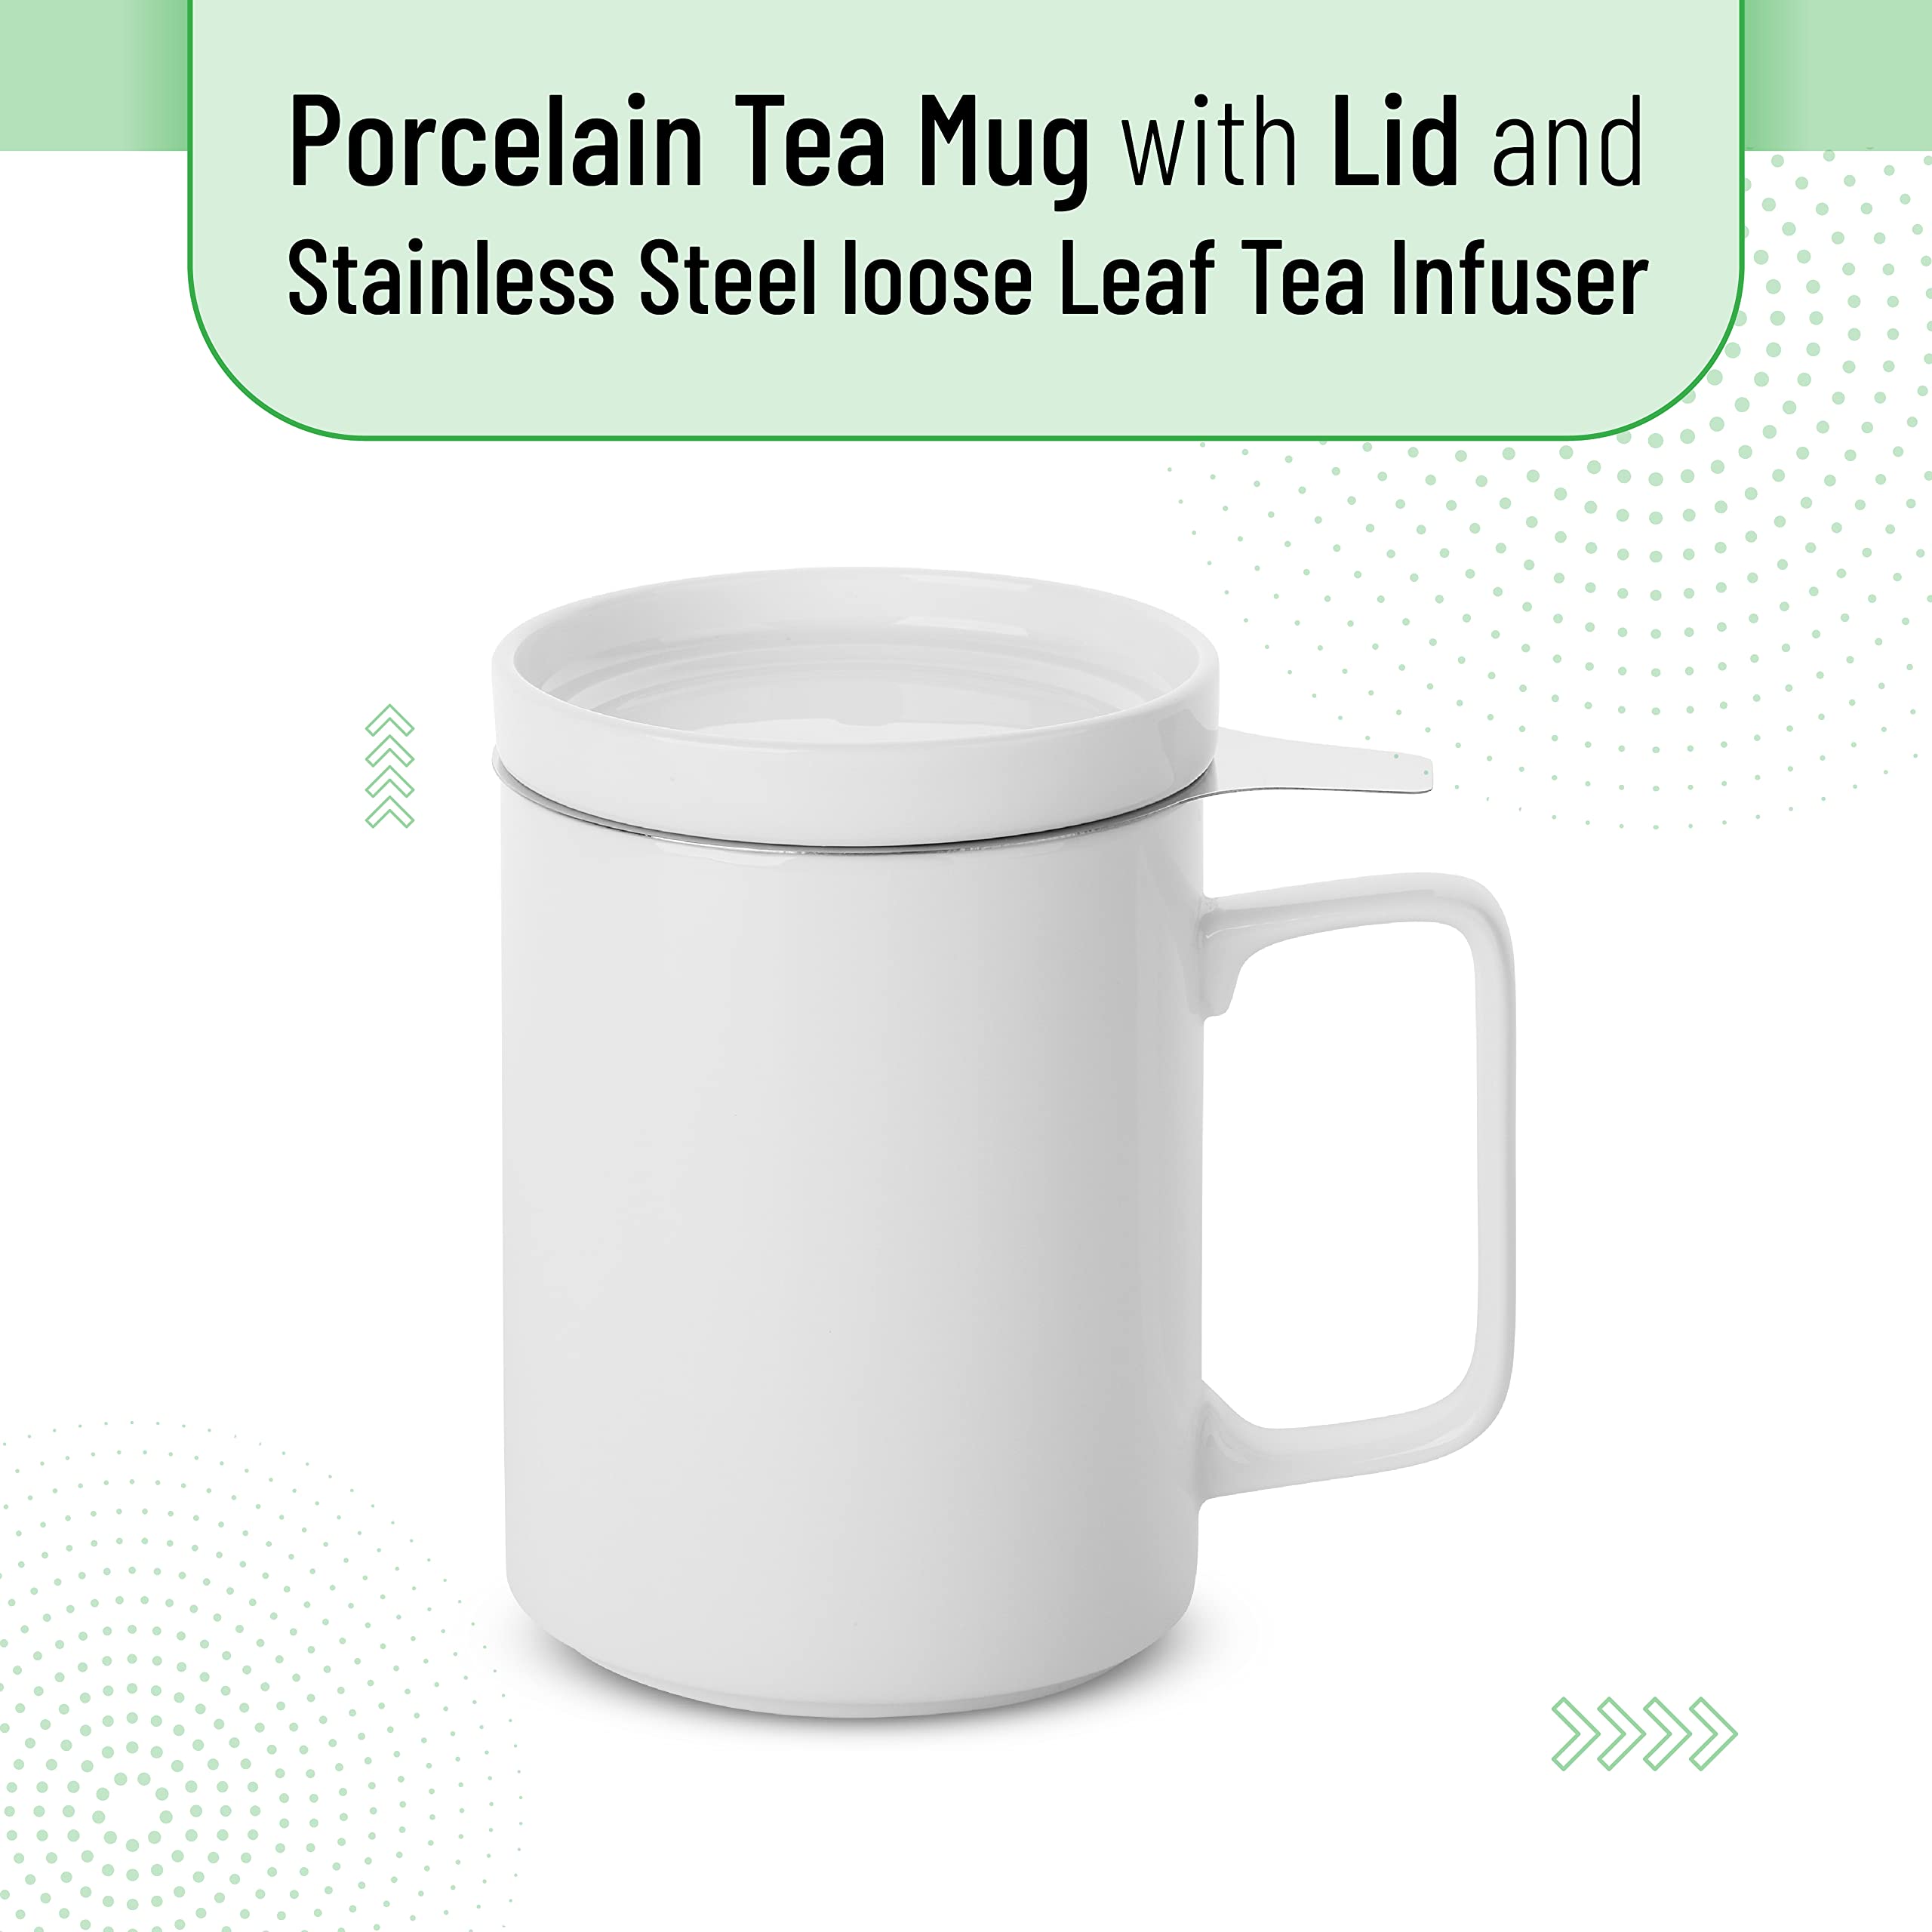 BTaT- Tea Cup with Lid, Tea Infuser Cup, 500ml 16oz Mug (White), Tea Cup with Stainless Steel Filter, Tea Cup with Infuser, Tea Mugs with Infuser and Lid, Tea Gifts for Tea Lovers, Tea Infuser Mug